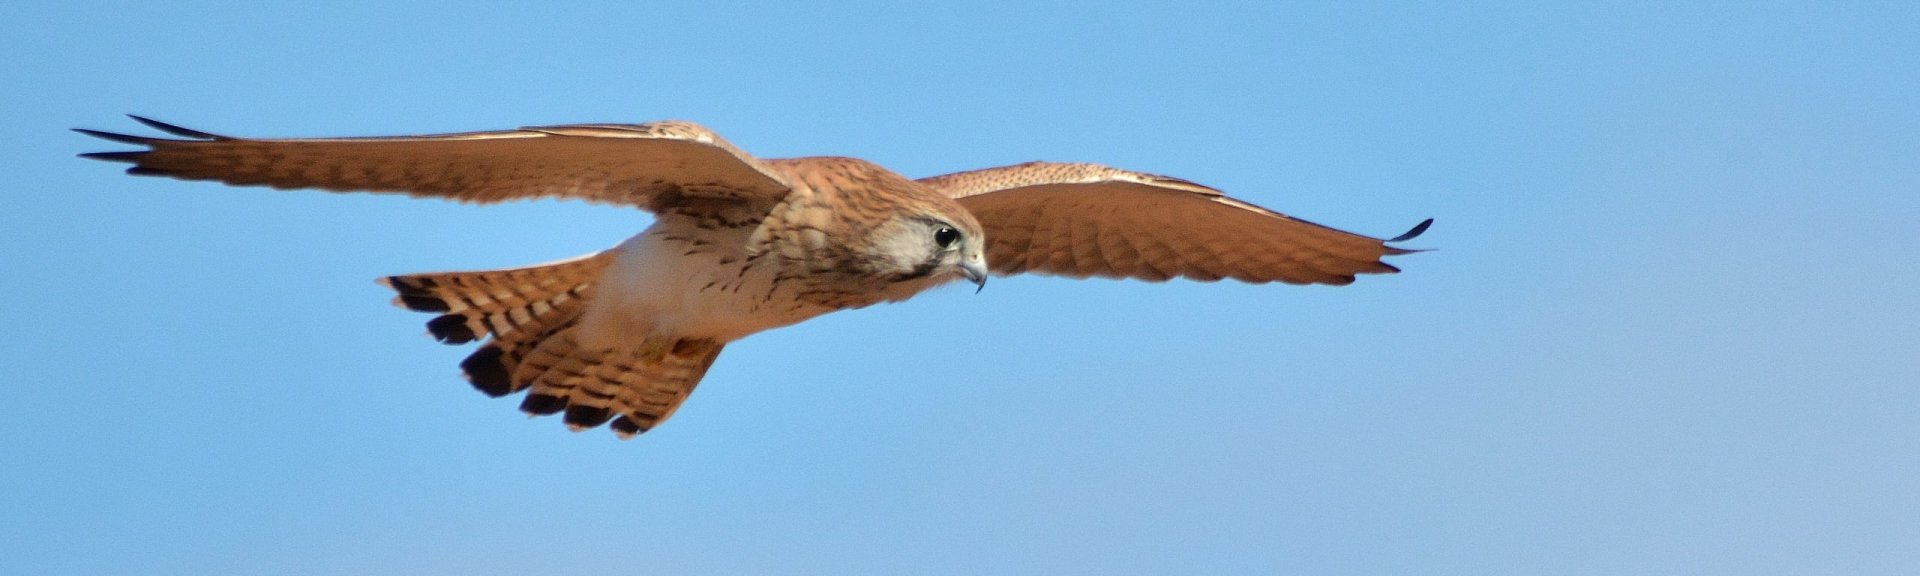 Nankeen kestrel. [Photo](https://flic.kr/p/nwBXPp): [Laurie Boyle](https://www.flickr.com/photos/92384235@N02/) / [CC BY-SA 2.0](https://creativecommons.org/licenses/by-sa/2.0/)